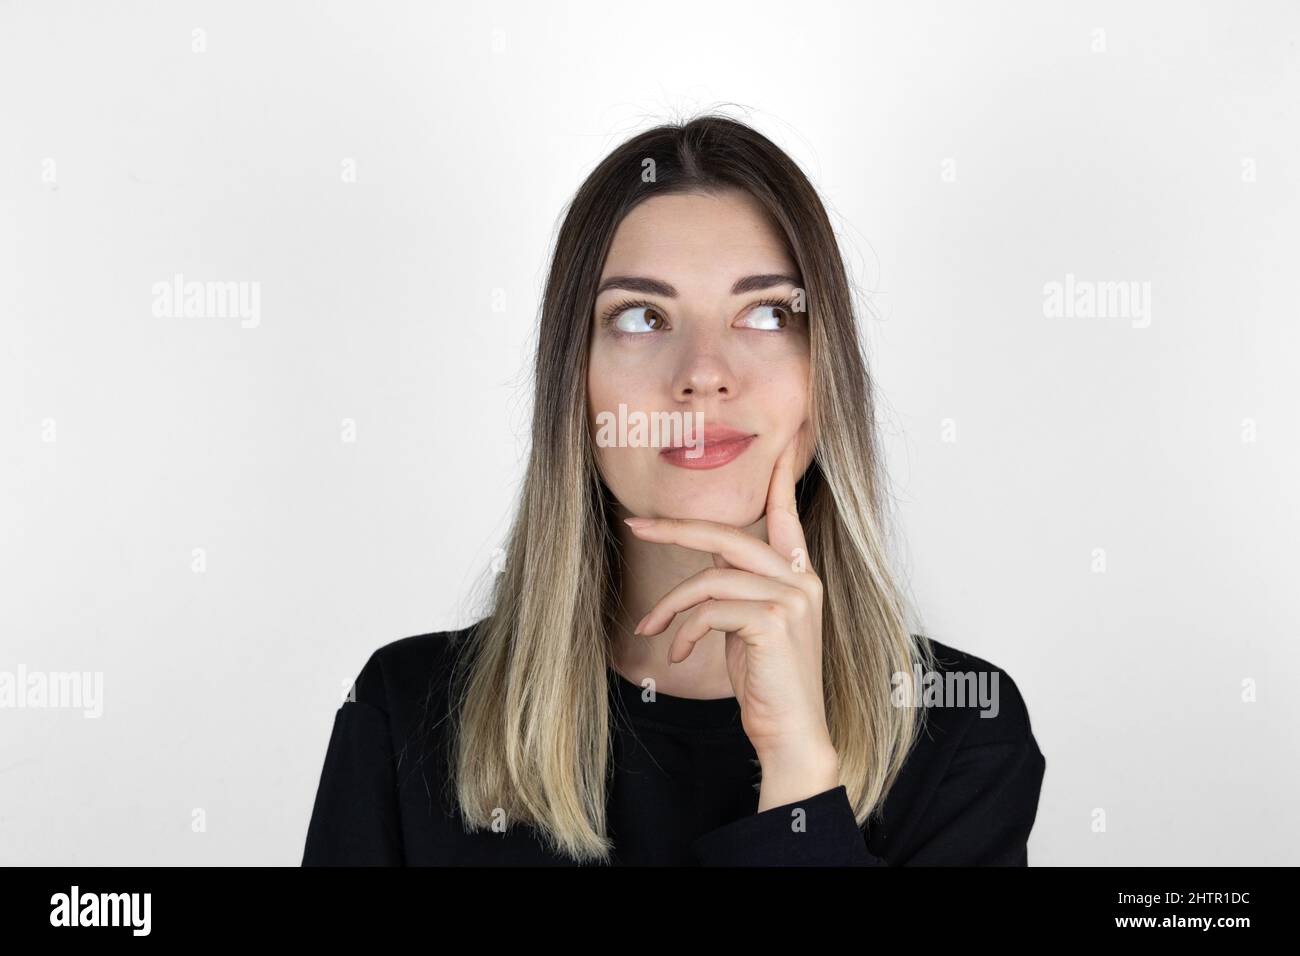 Young beautiful girl wearing casual clothes over isolated white background with hand on chin thinking about question, pensive expression. Stock Photo